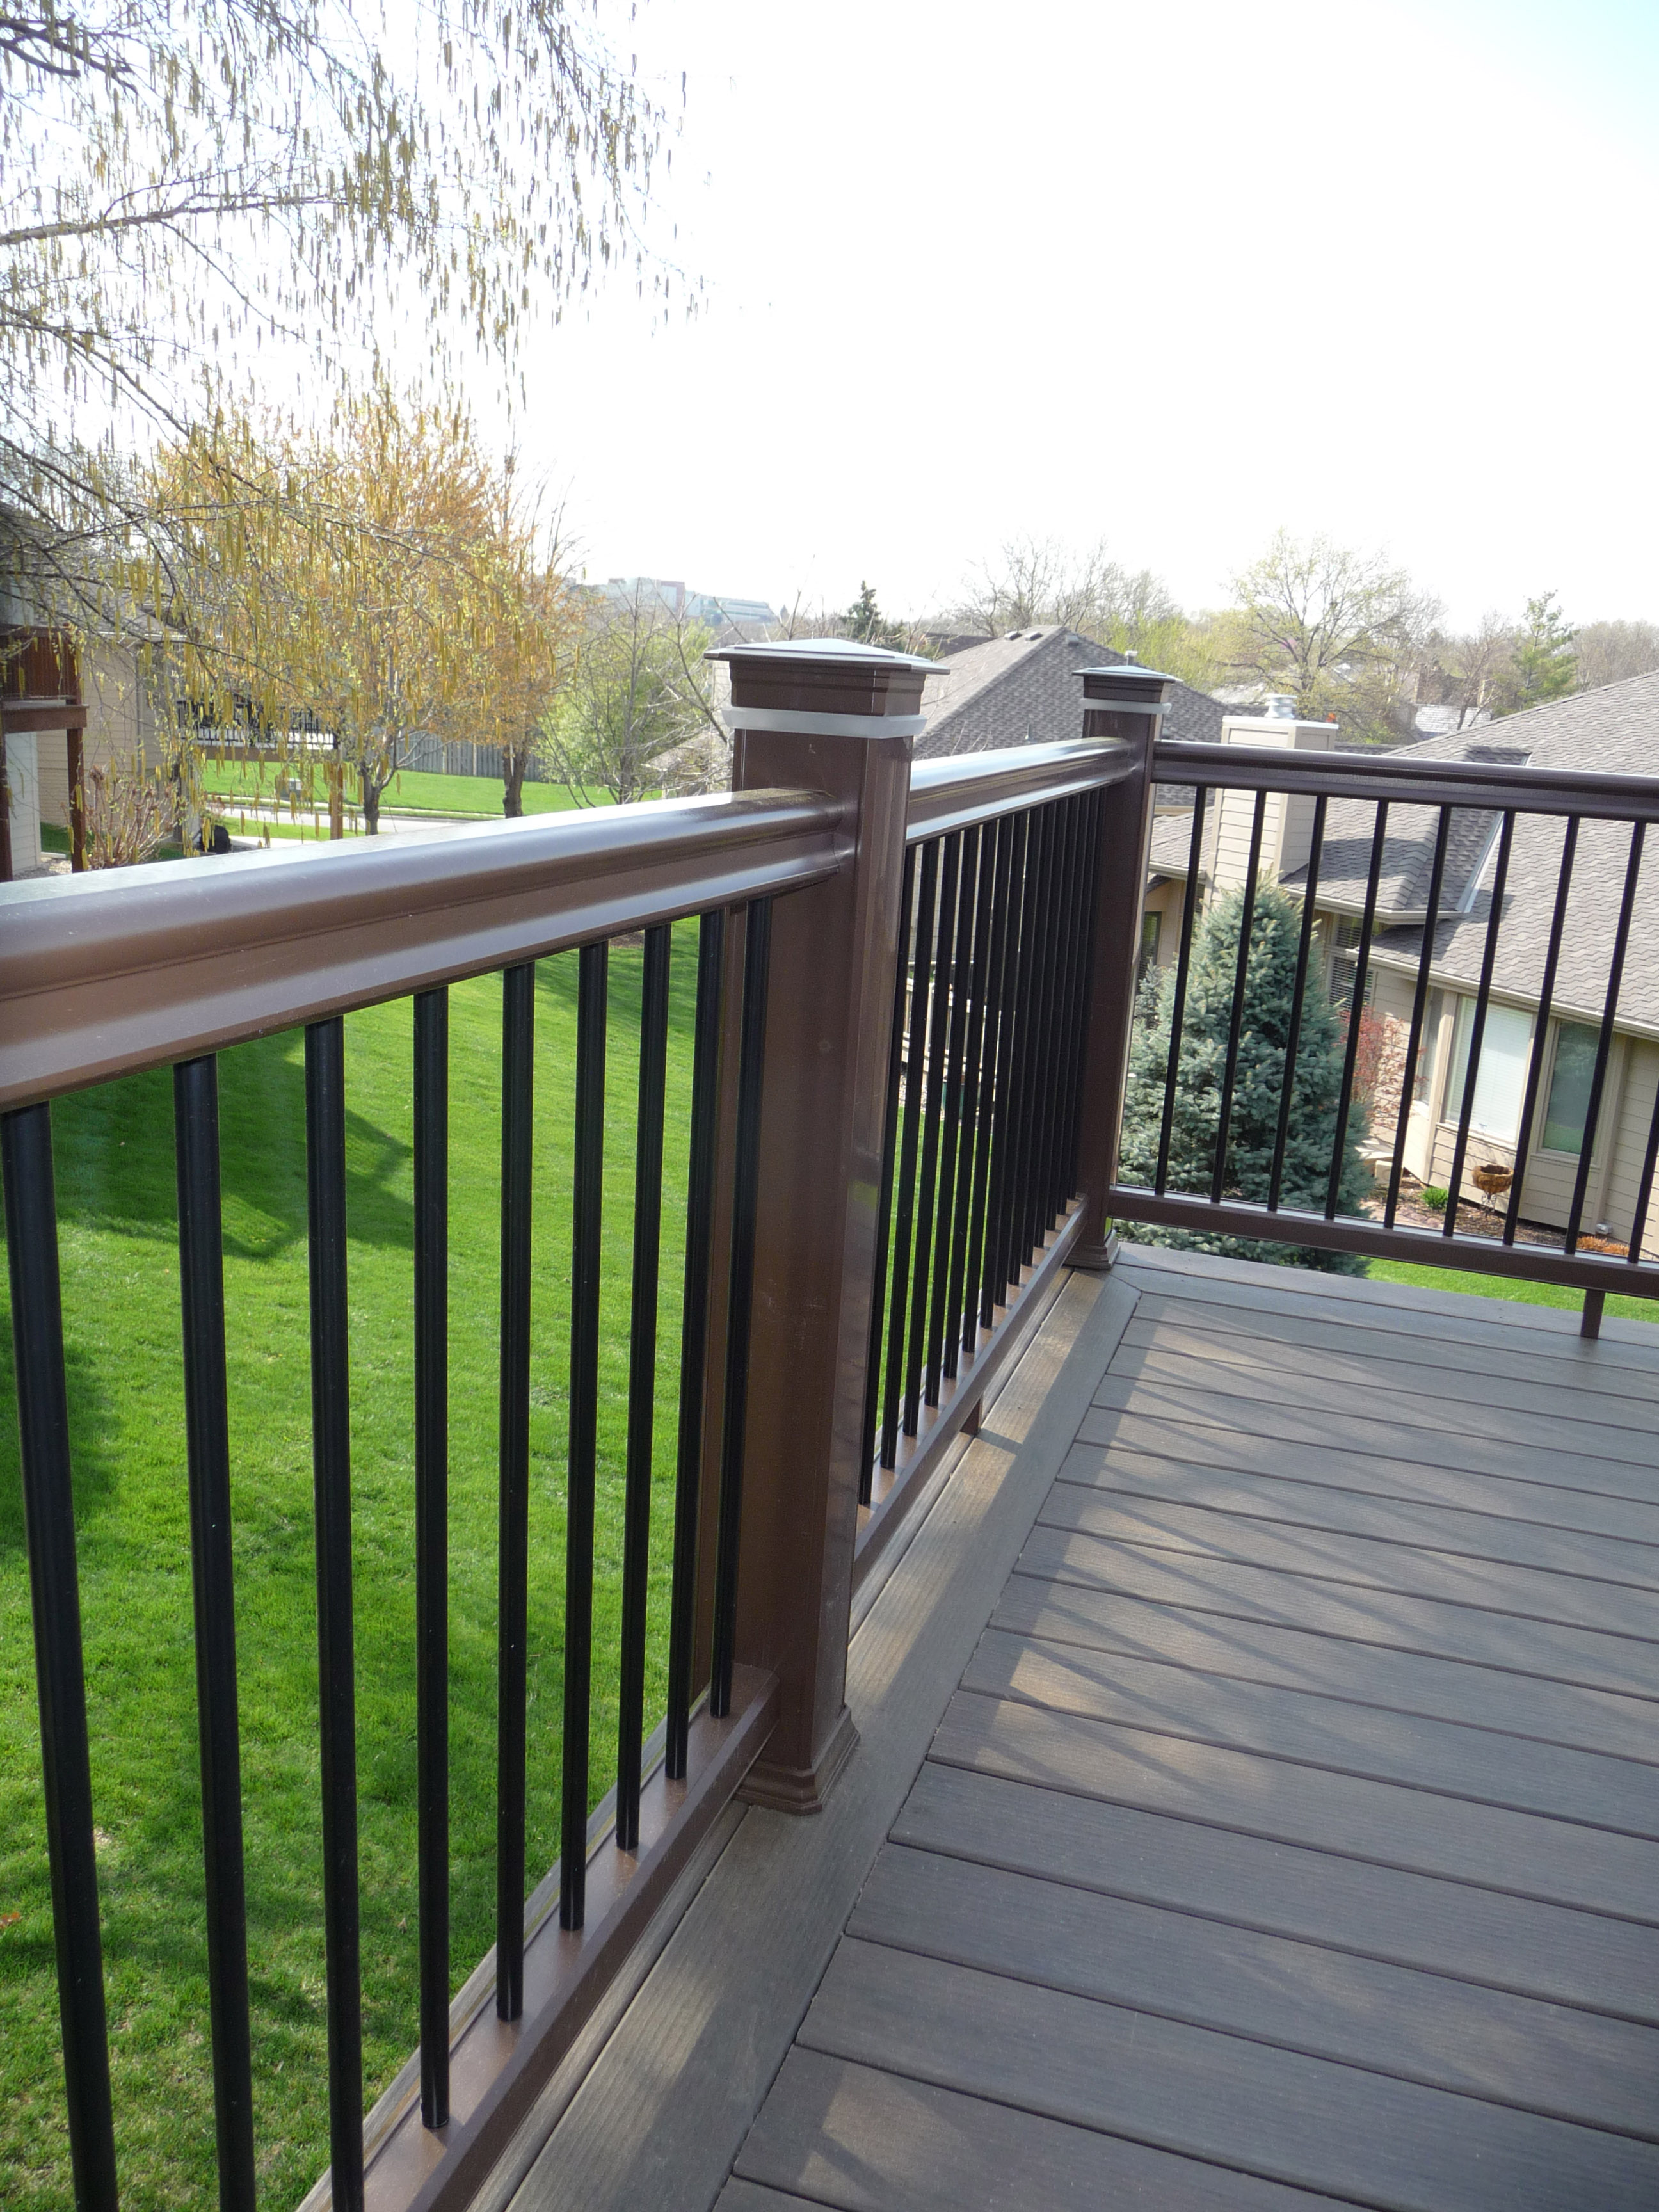 TimberTech capped composite decking and railing also feature post cap lighting to  extend outdoor fun into the evening.